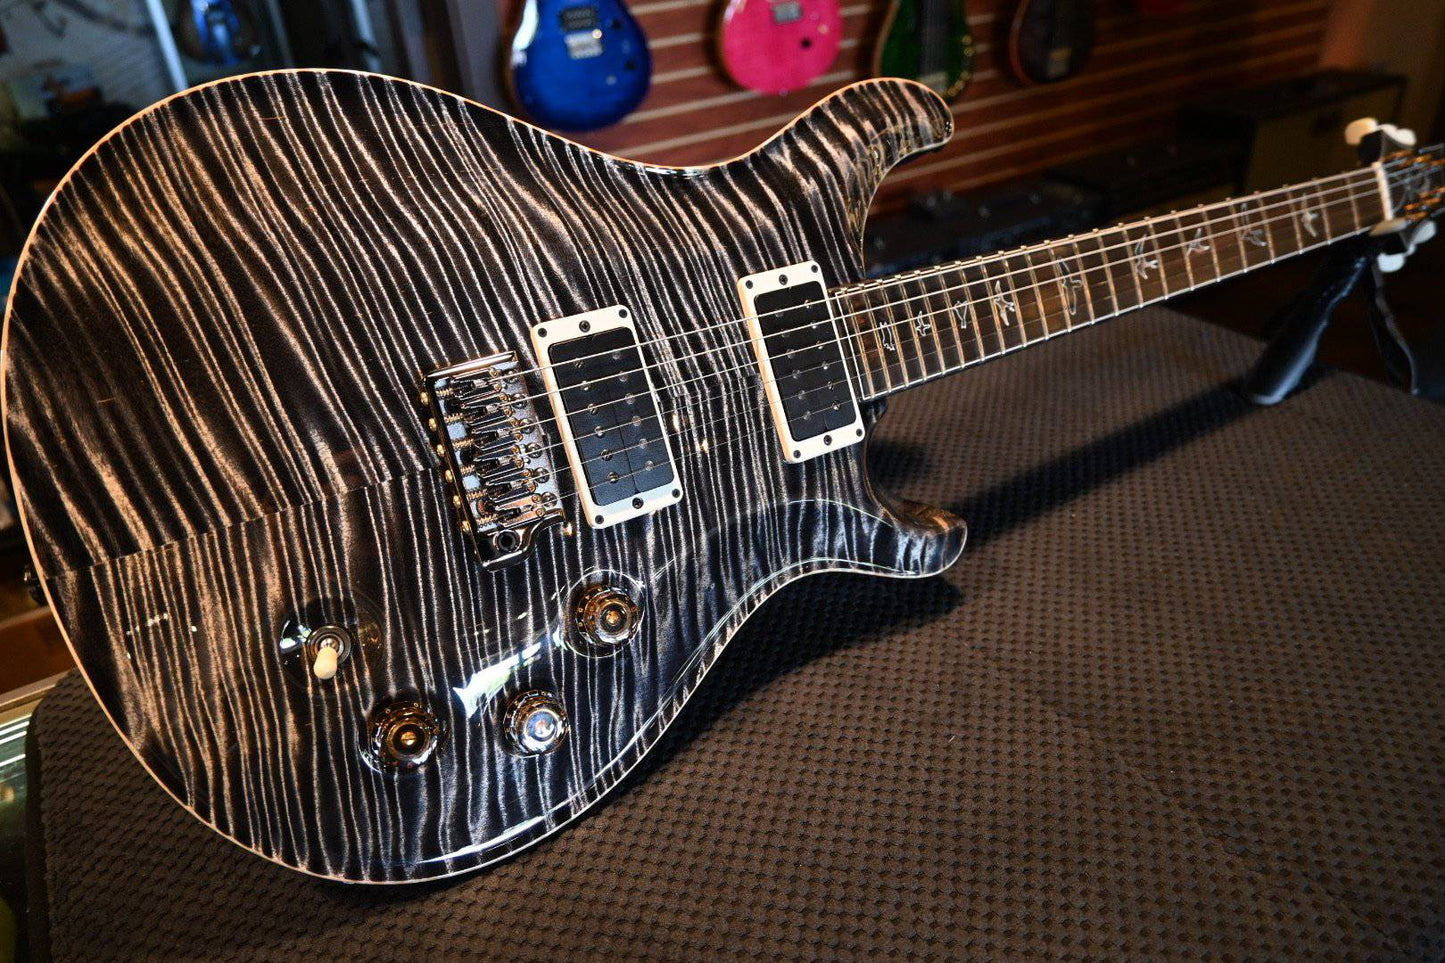 PRS Paul Reed Smith Private Stock DGT - Charcoal/Black with White Grainfill #8657 - Danville Music